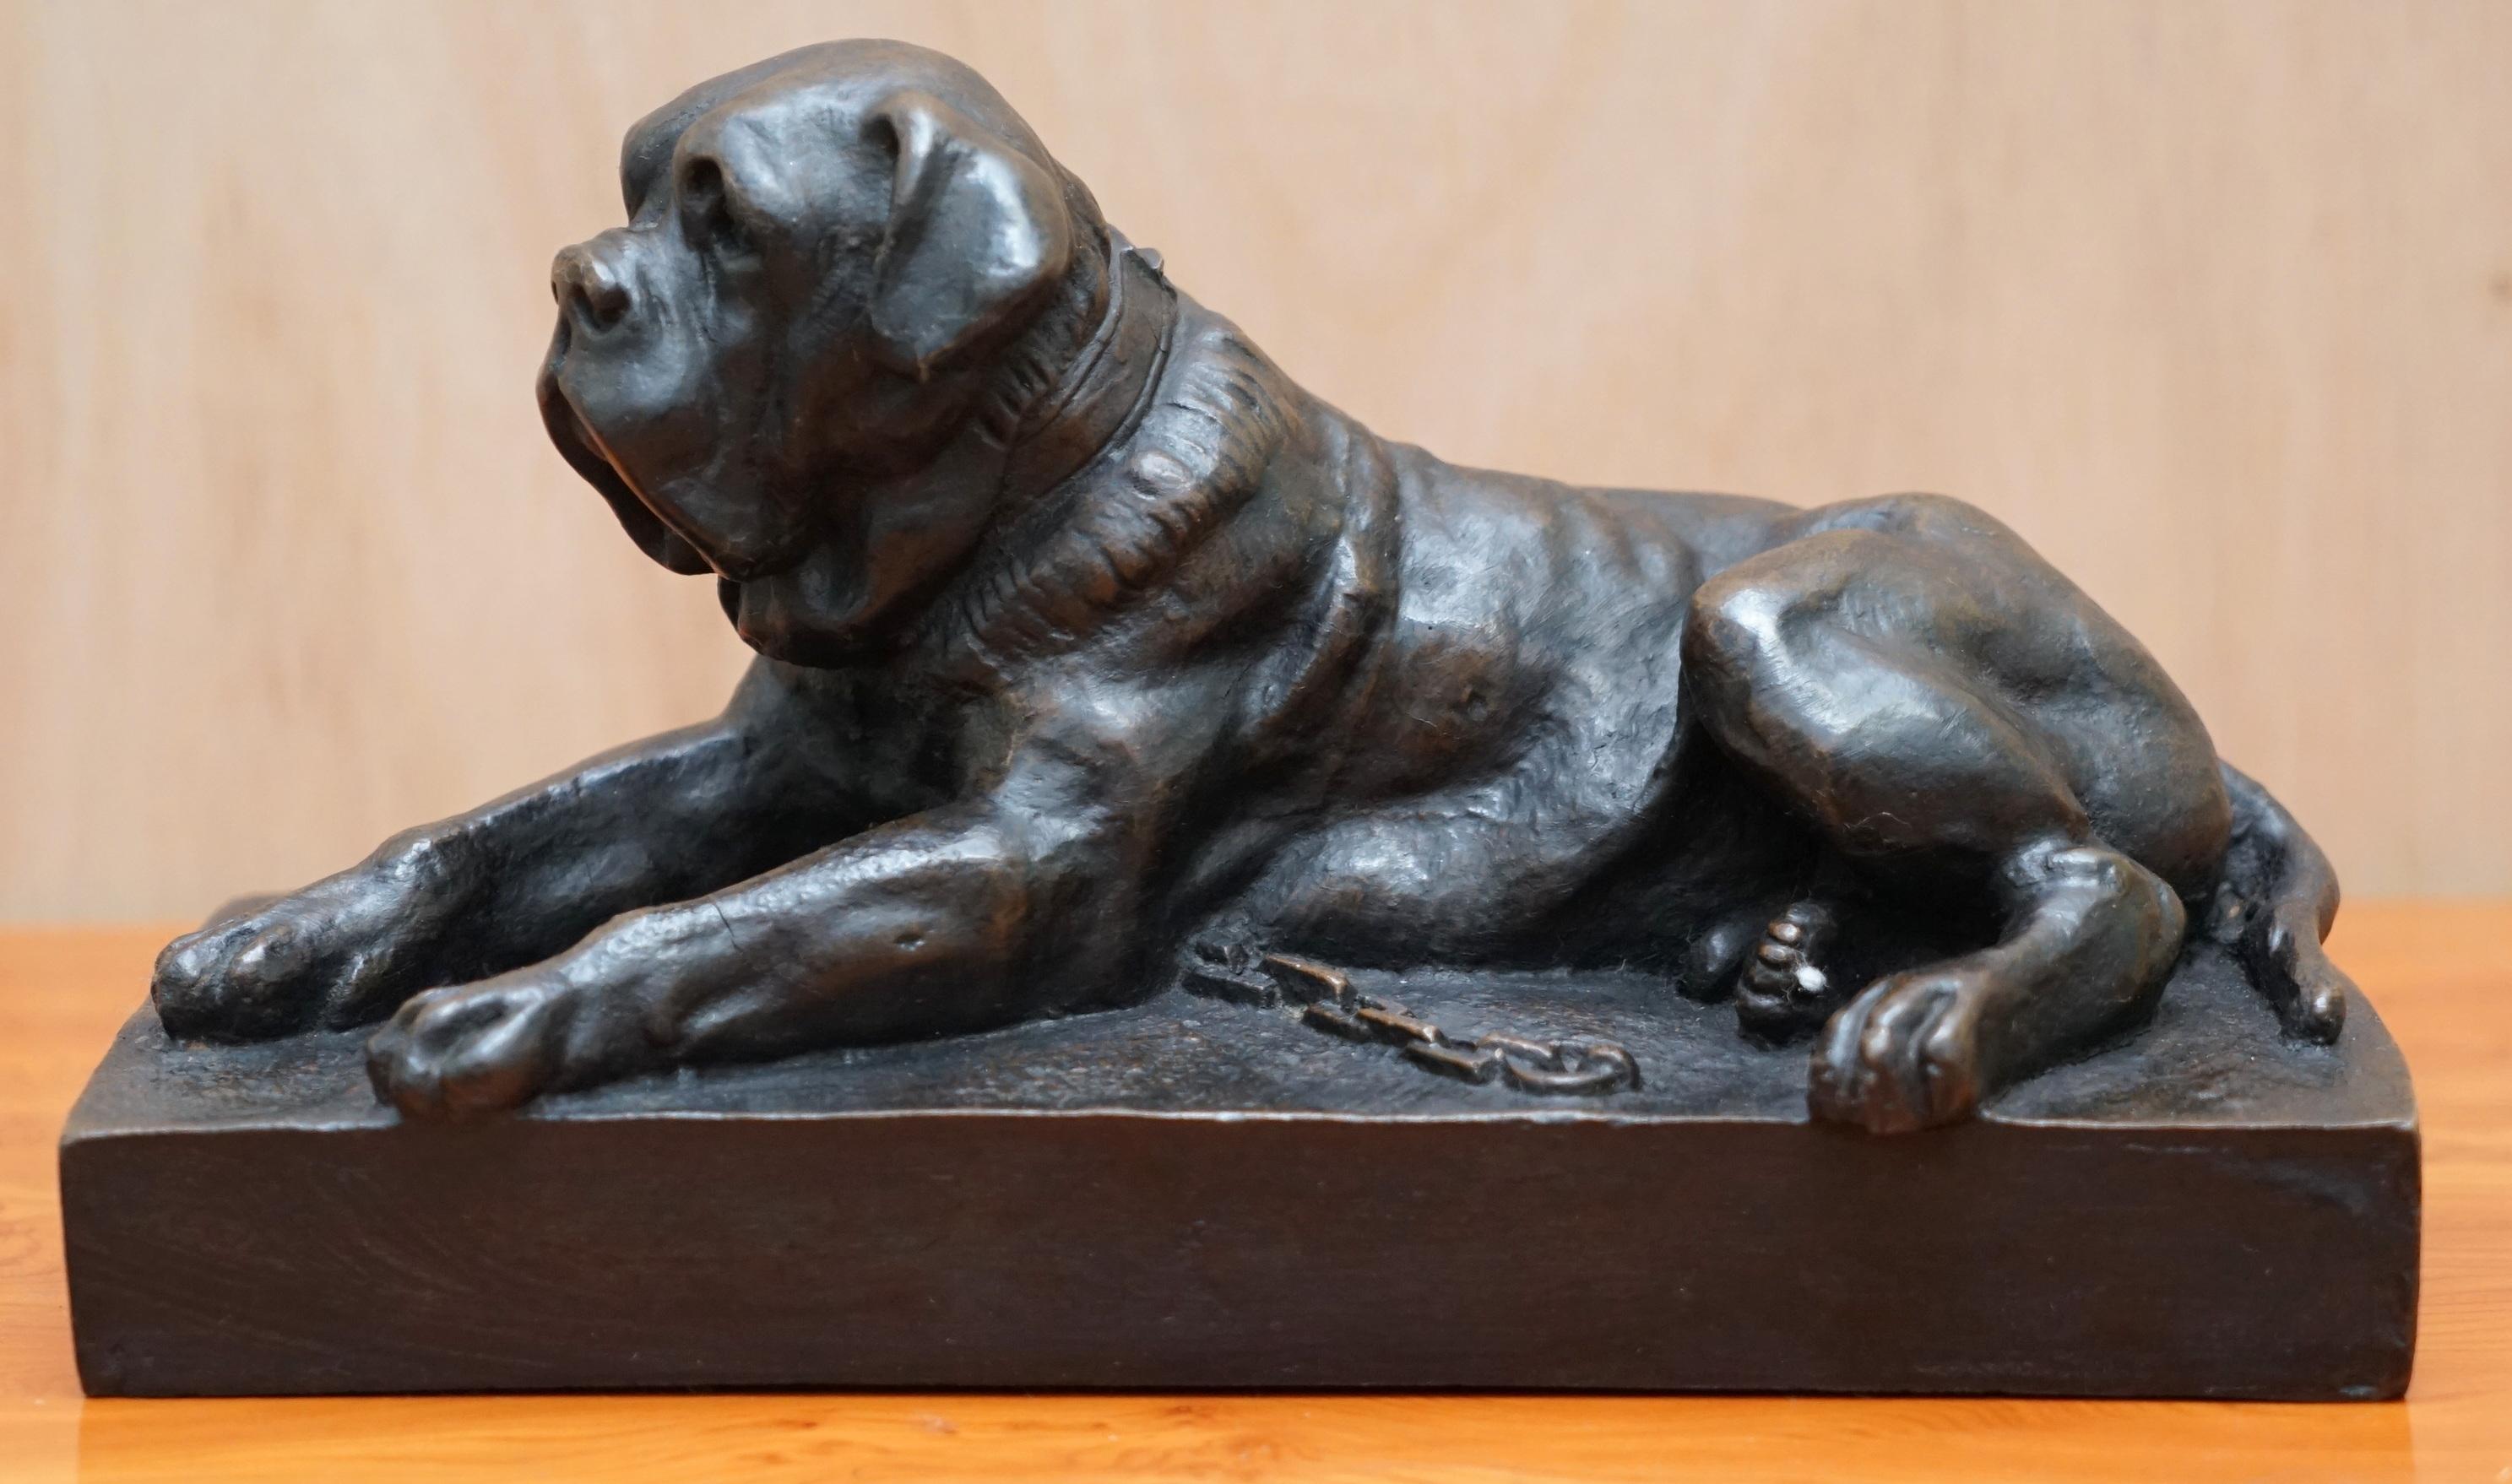 We are delighted to offer for sale this lovely solid bronze statue of a Mastiff dog laying down

A good looking and well made piece, very decorative, 

We have cleaned waxed and polished it, there doesn’t seem to be any issues at all to